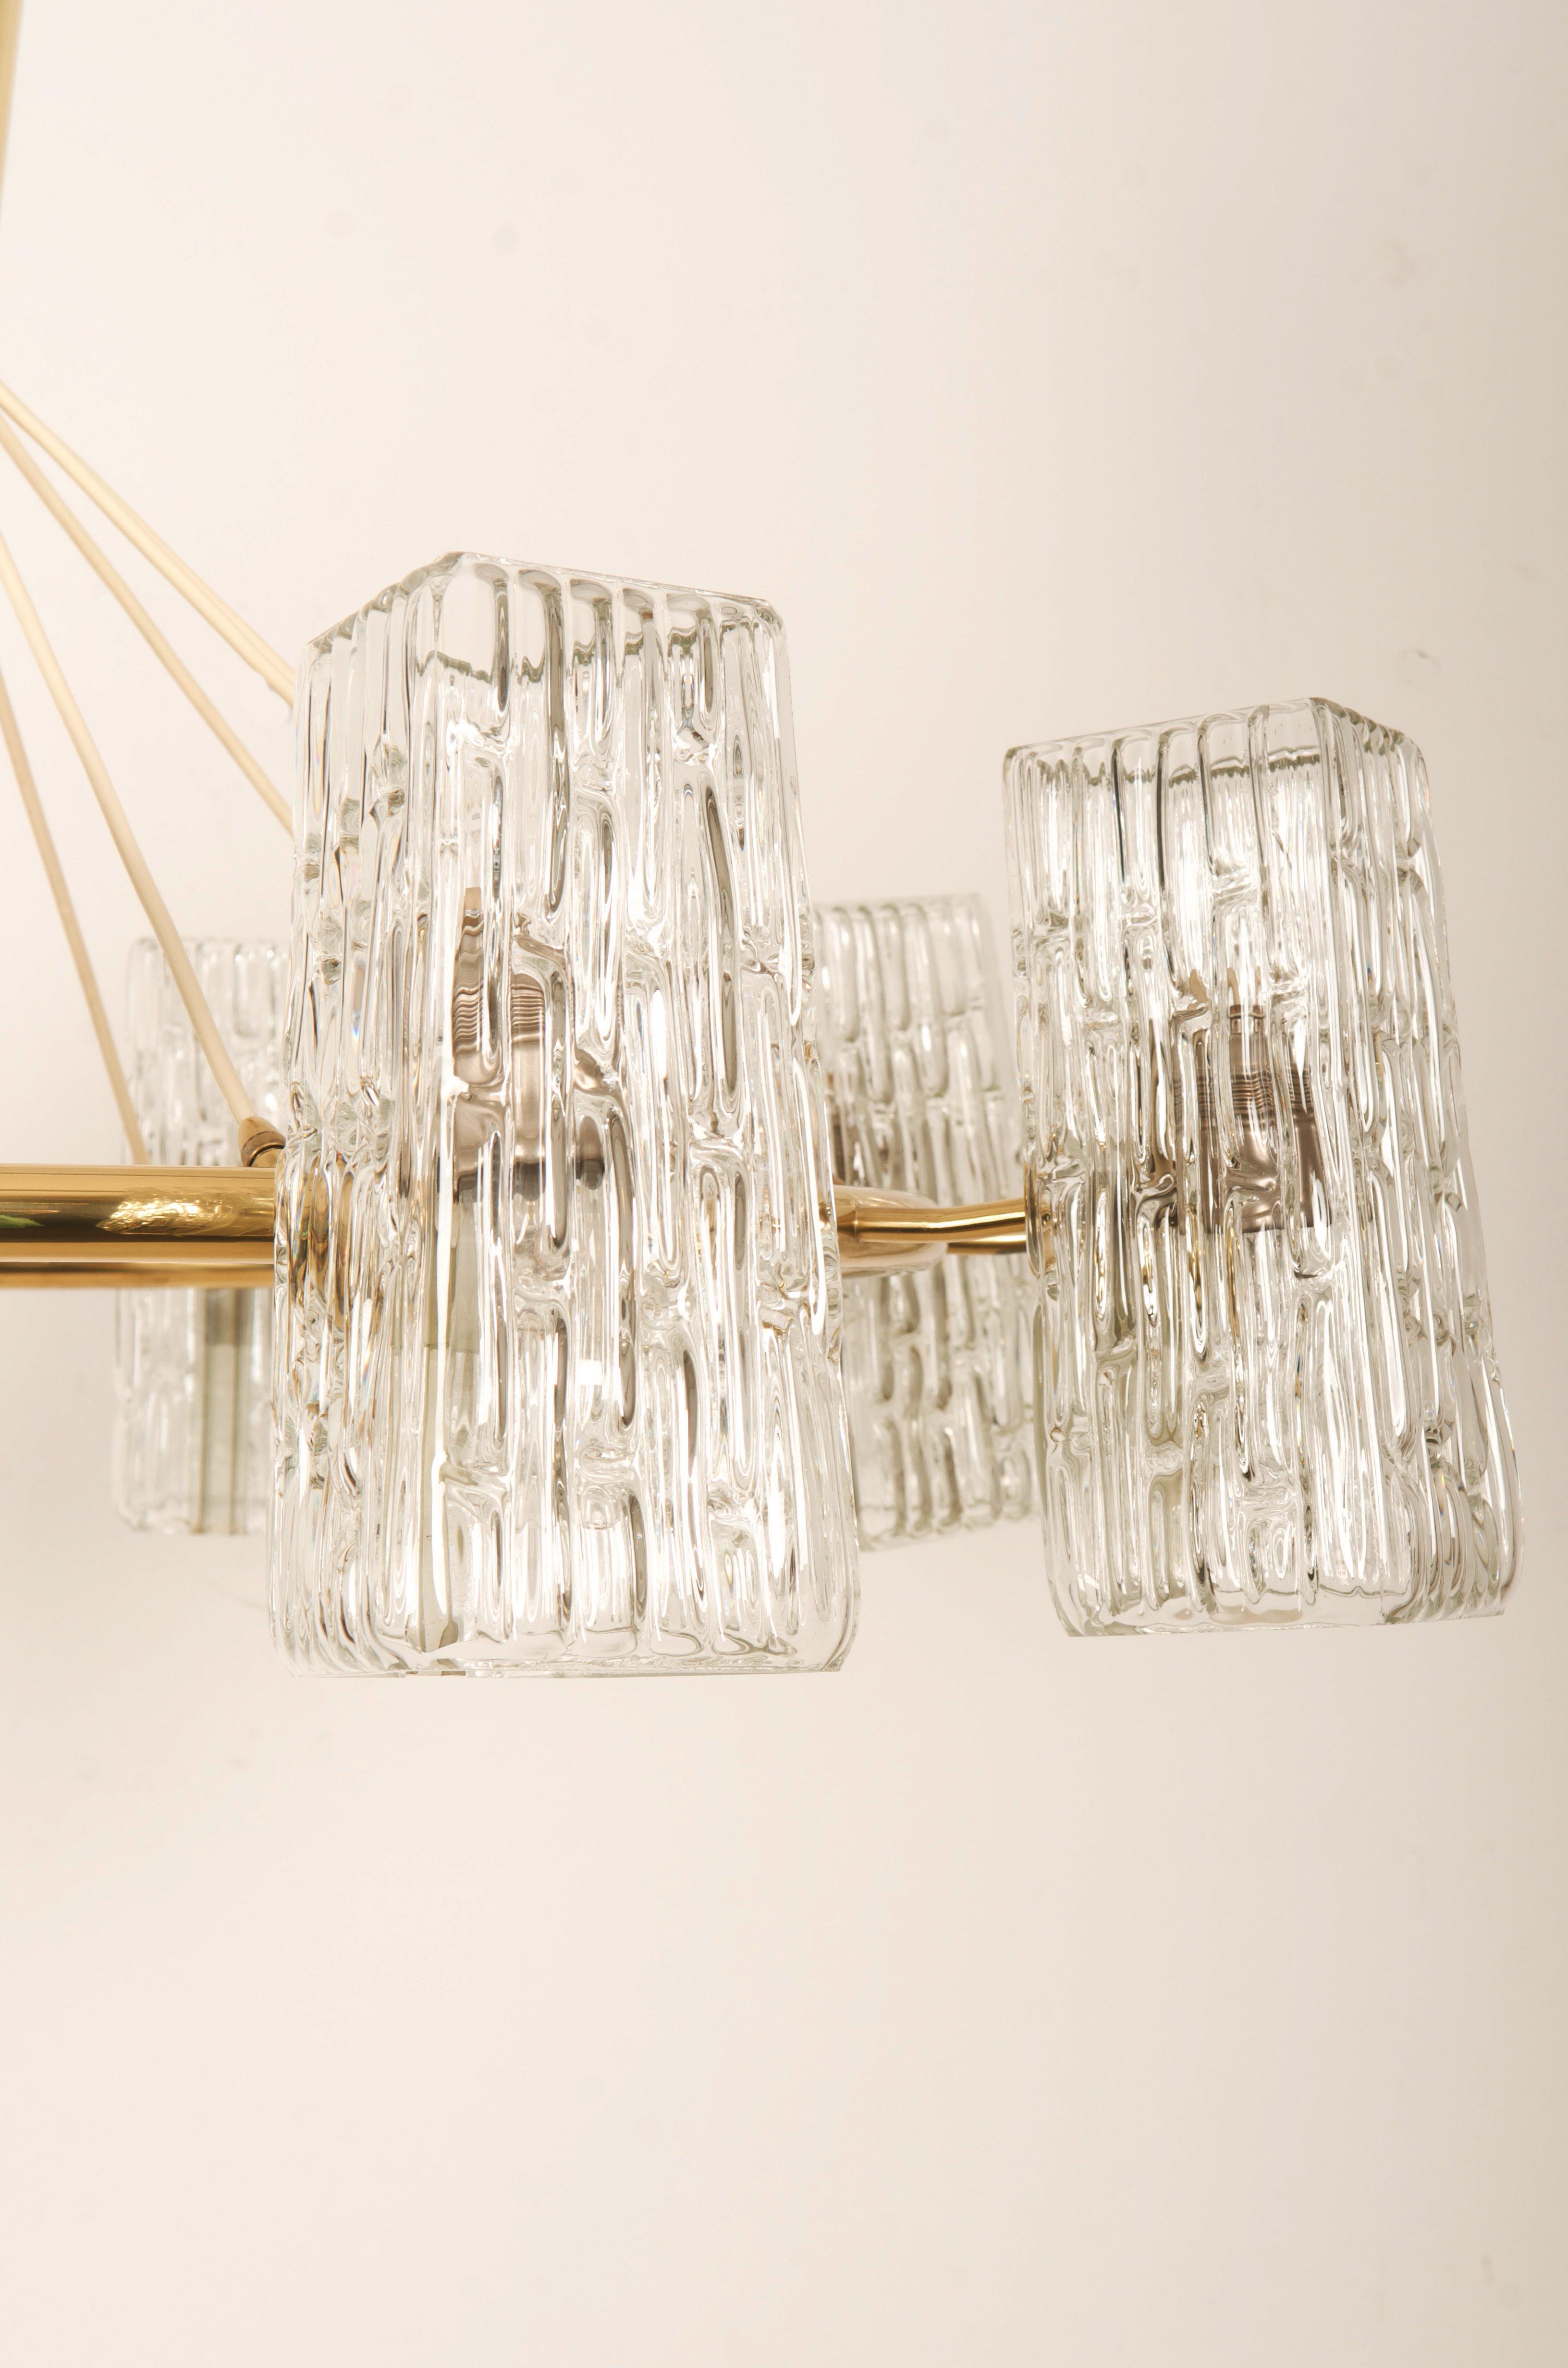 Austrian Huge Midcentury Brass Chandelier With Pressed Glass Shades By Rupert Nikoll For Sale